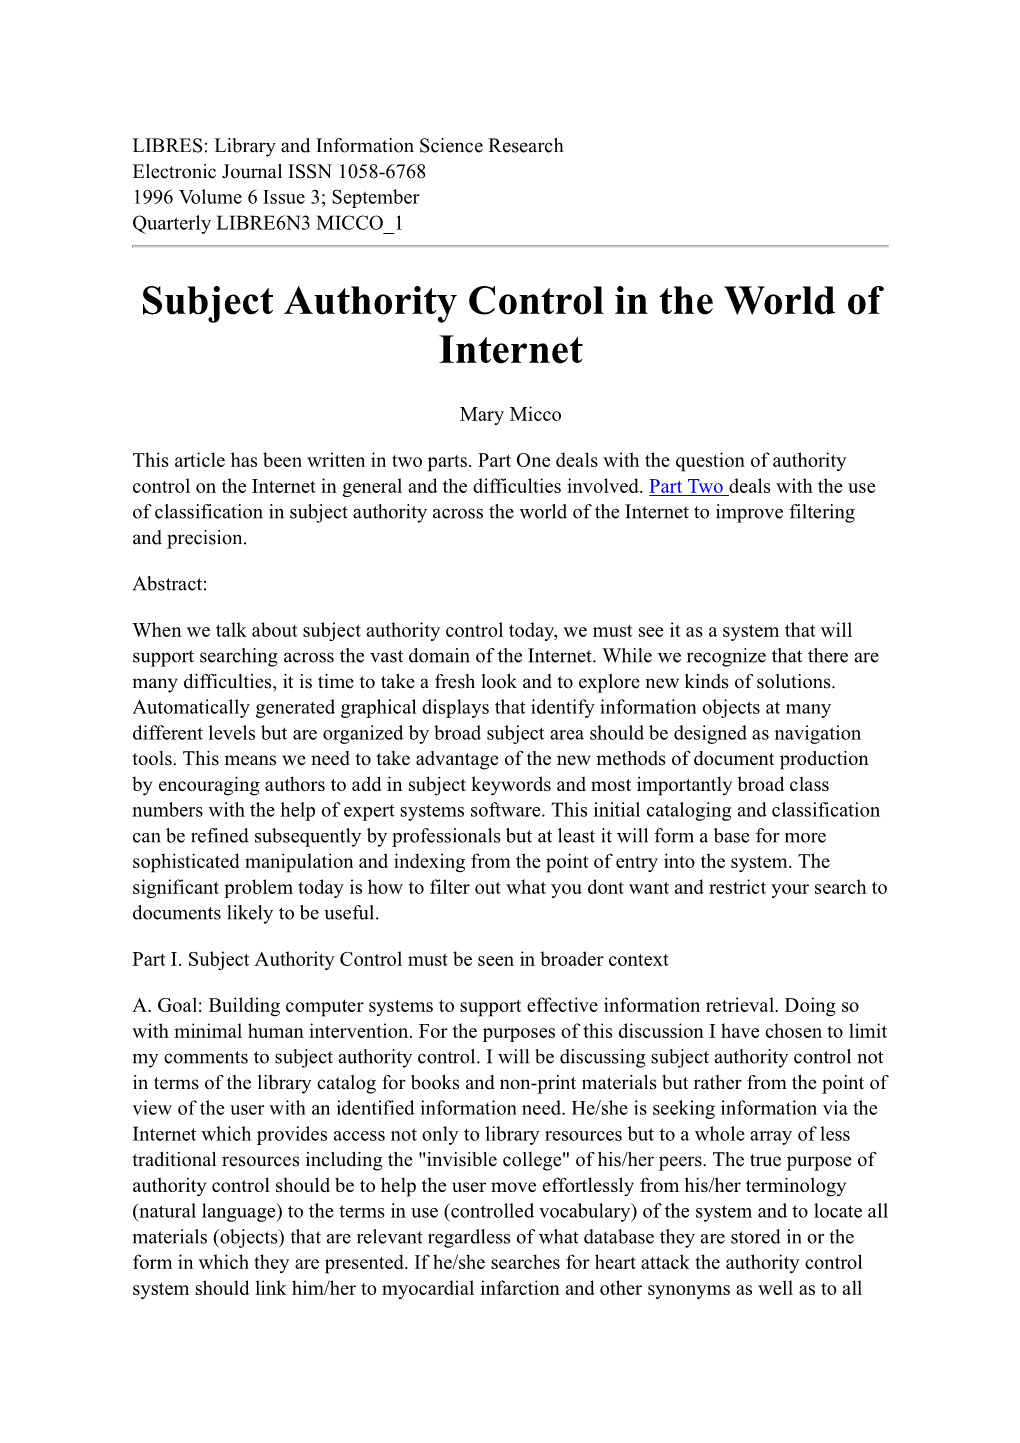 Subject Authority Control in the World of Internet